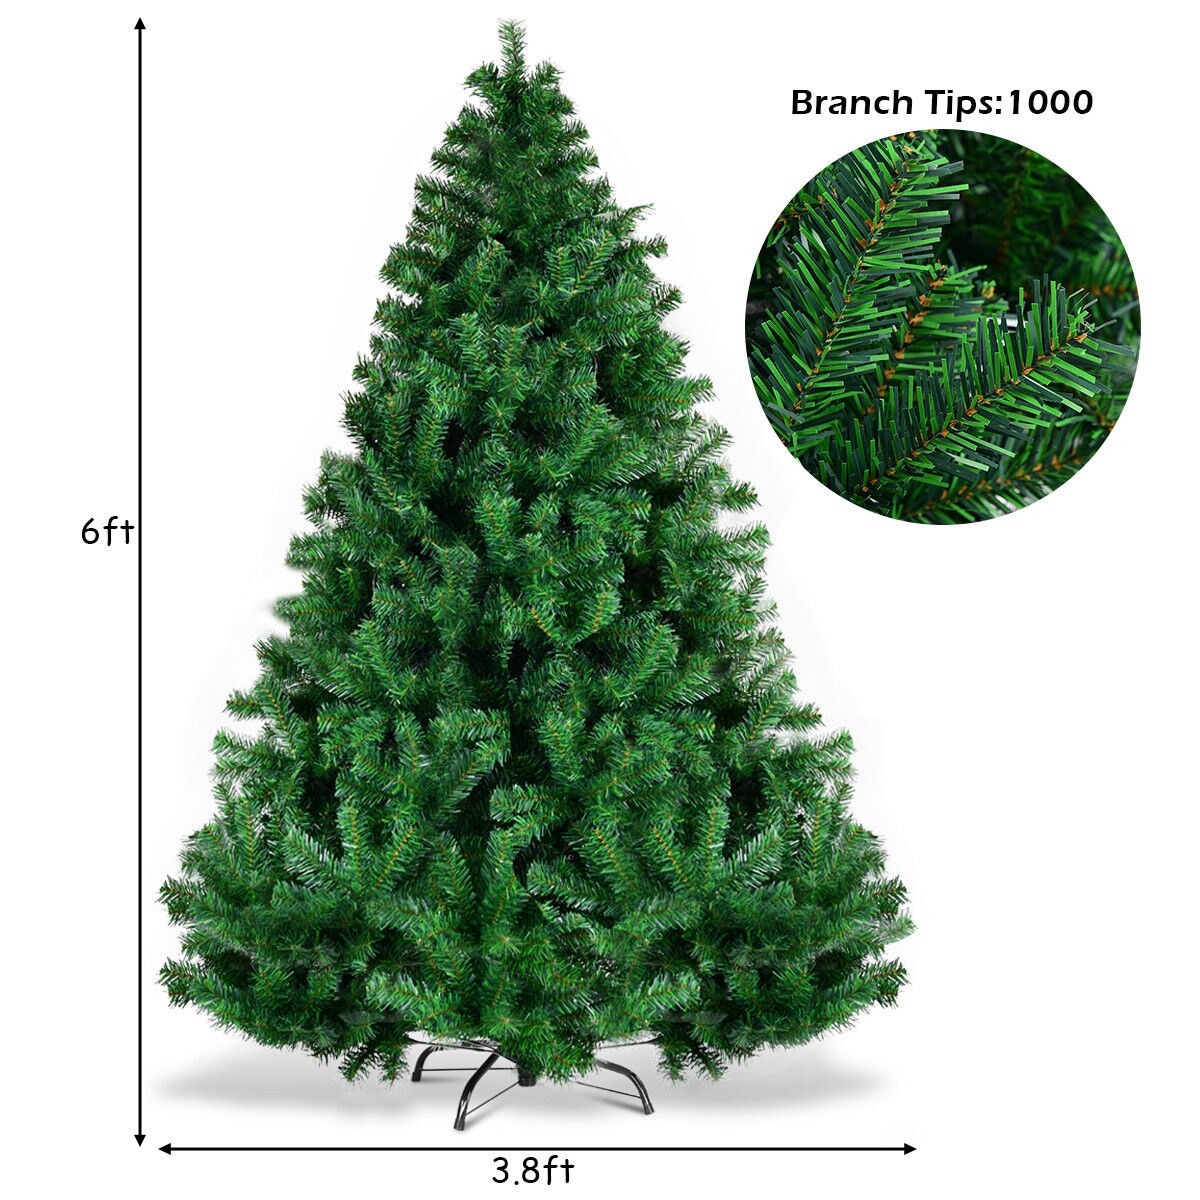 6Ft Artificial Christmas Tree Holiday Decor w/ 560 Branch Tips Green Home 